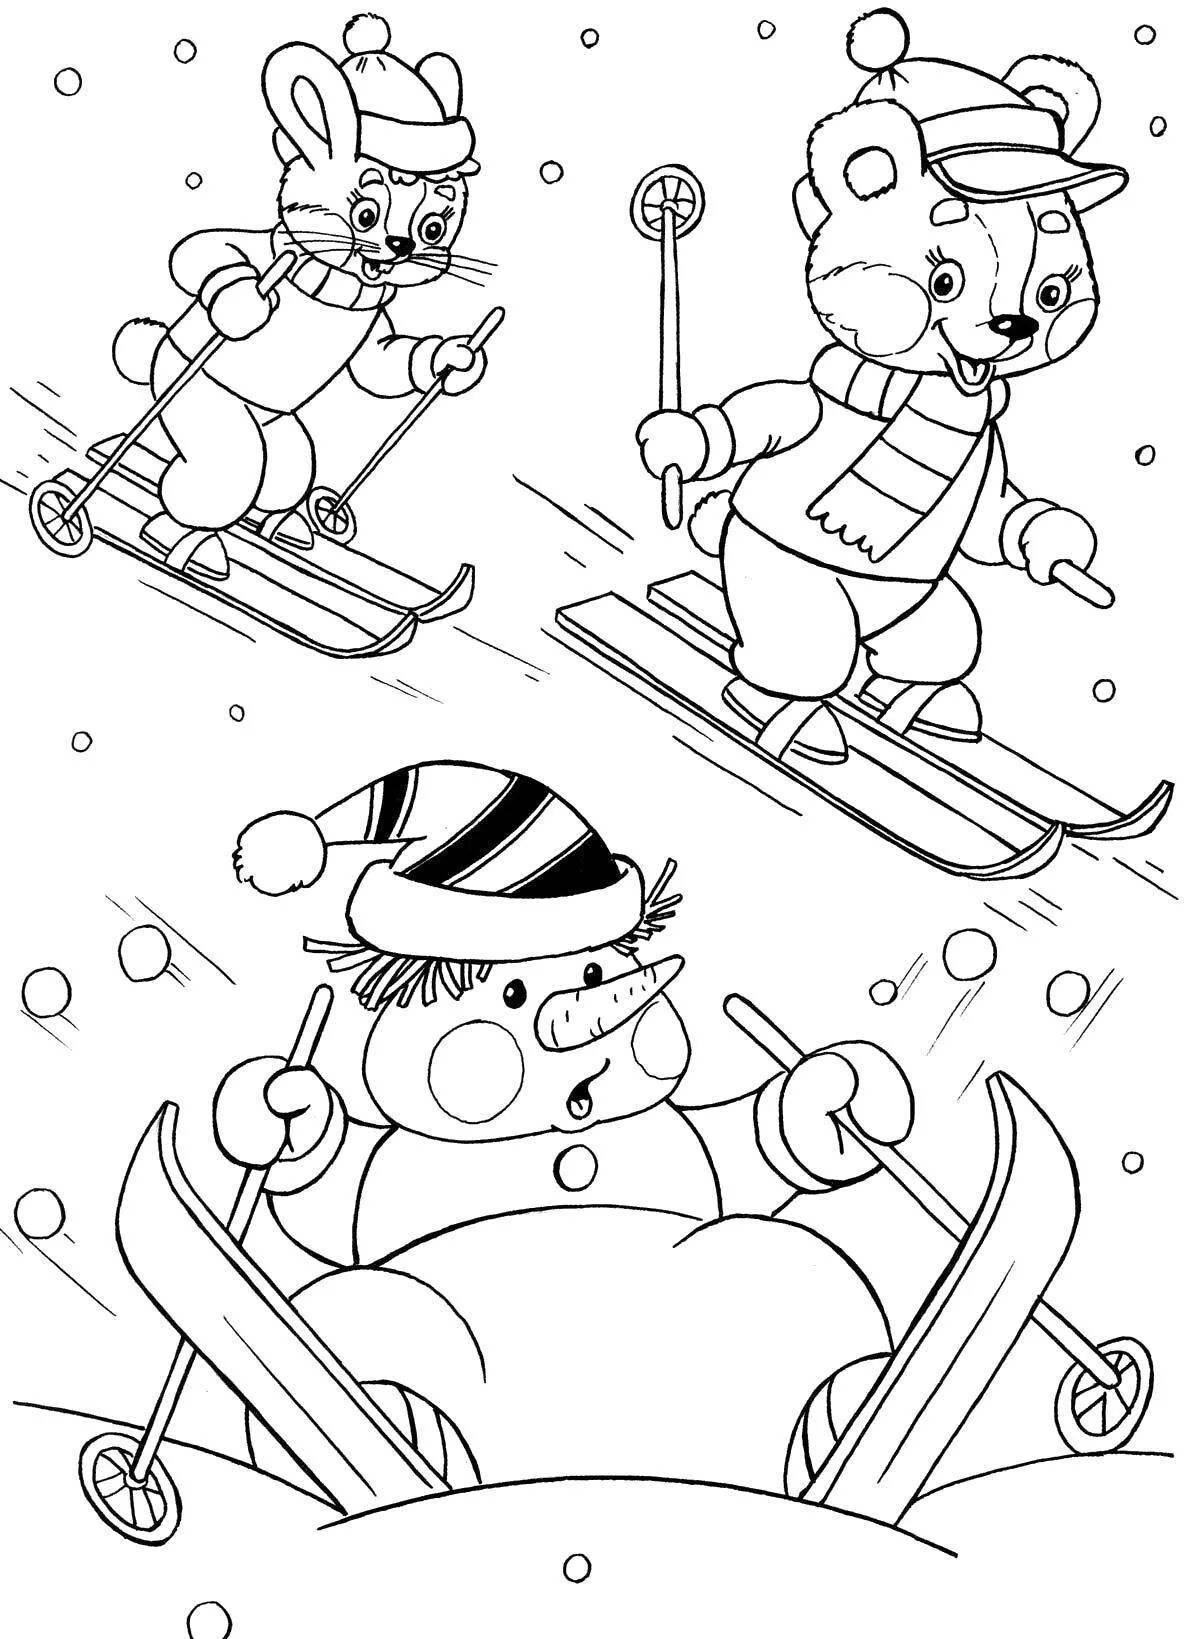 A fun family coloring book for skiing